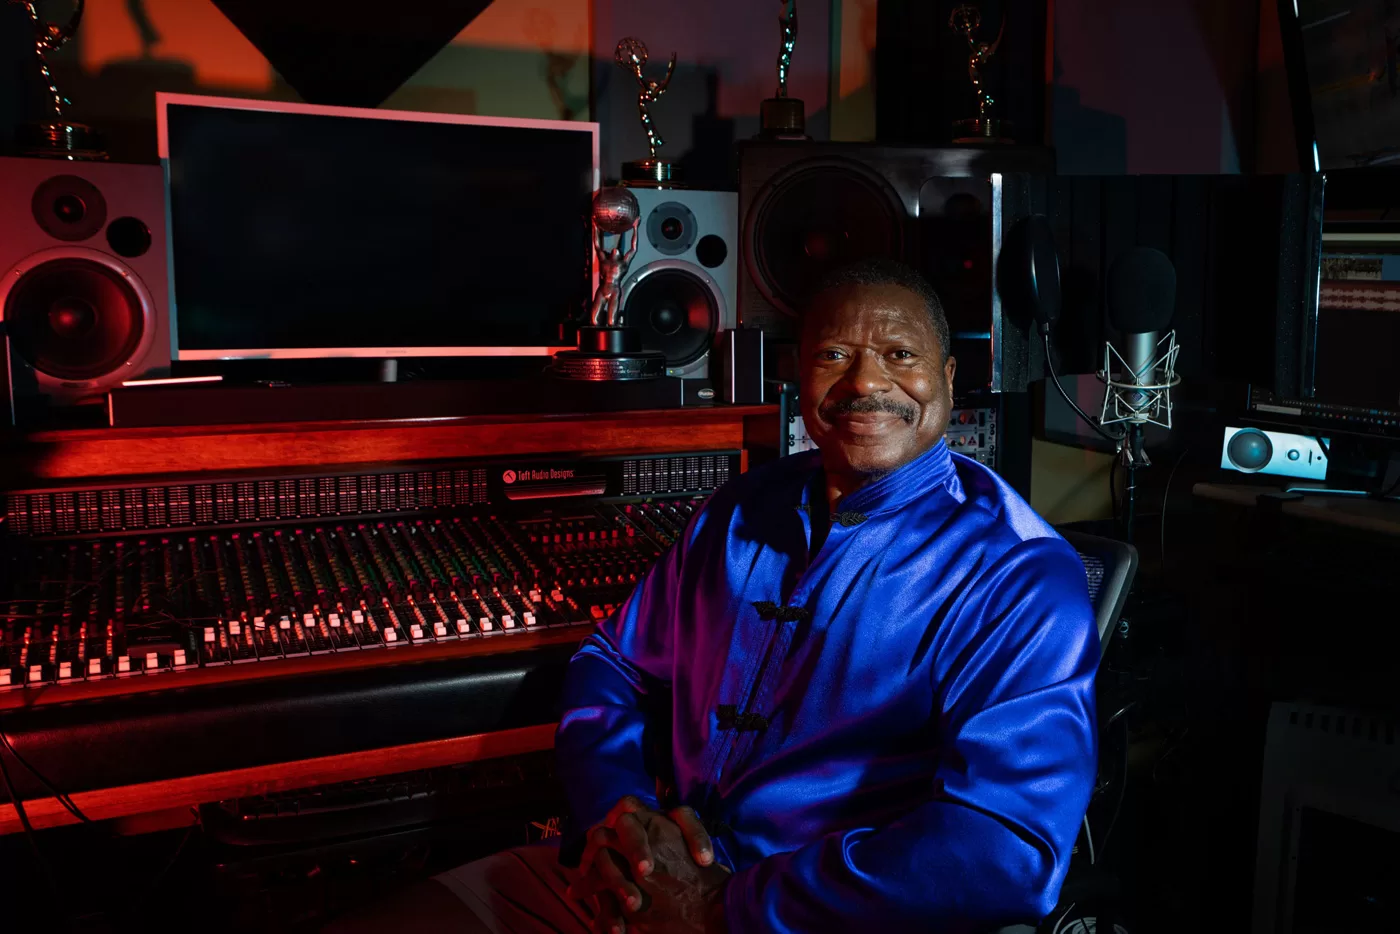 Sounds of Blackness producer Gary Hines poses for an editorial portrait in a recording studio.